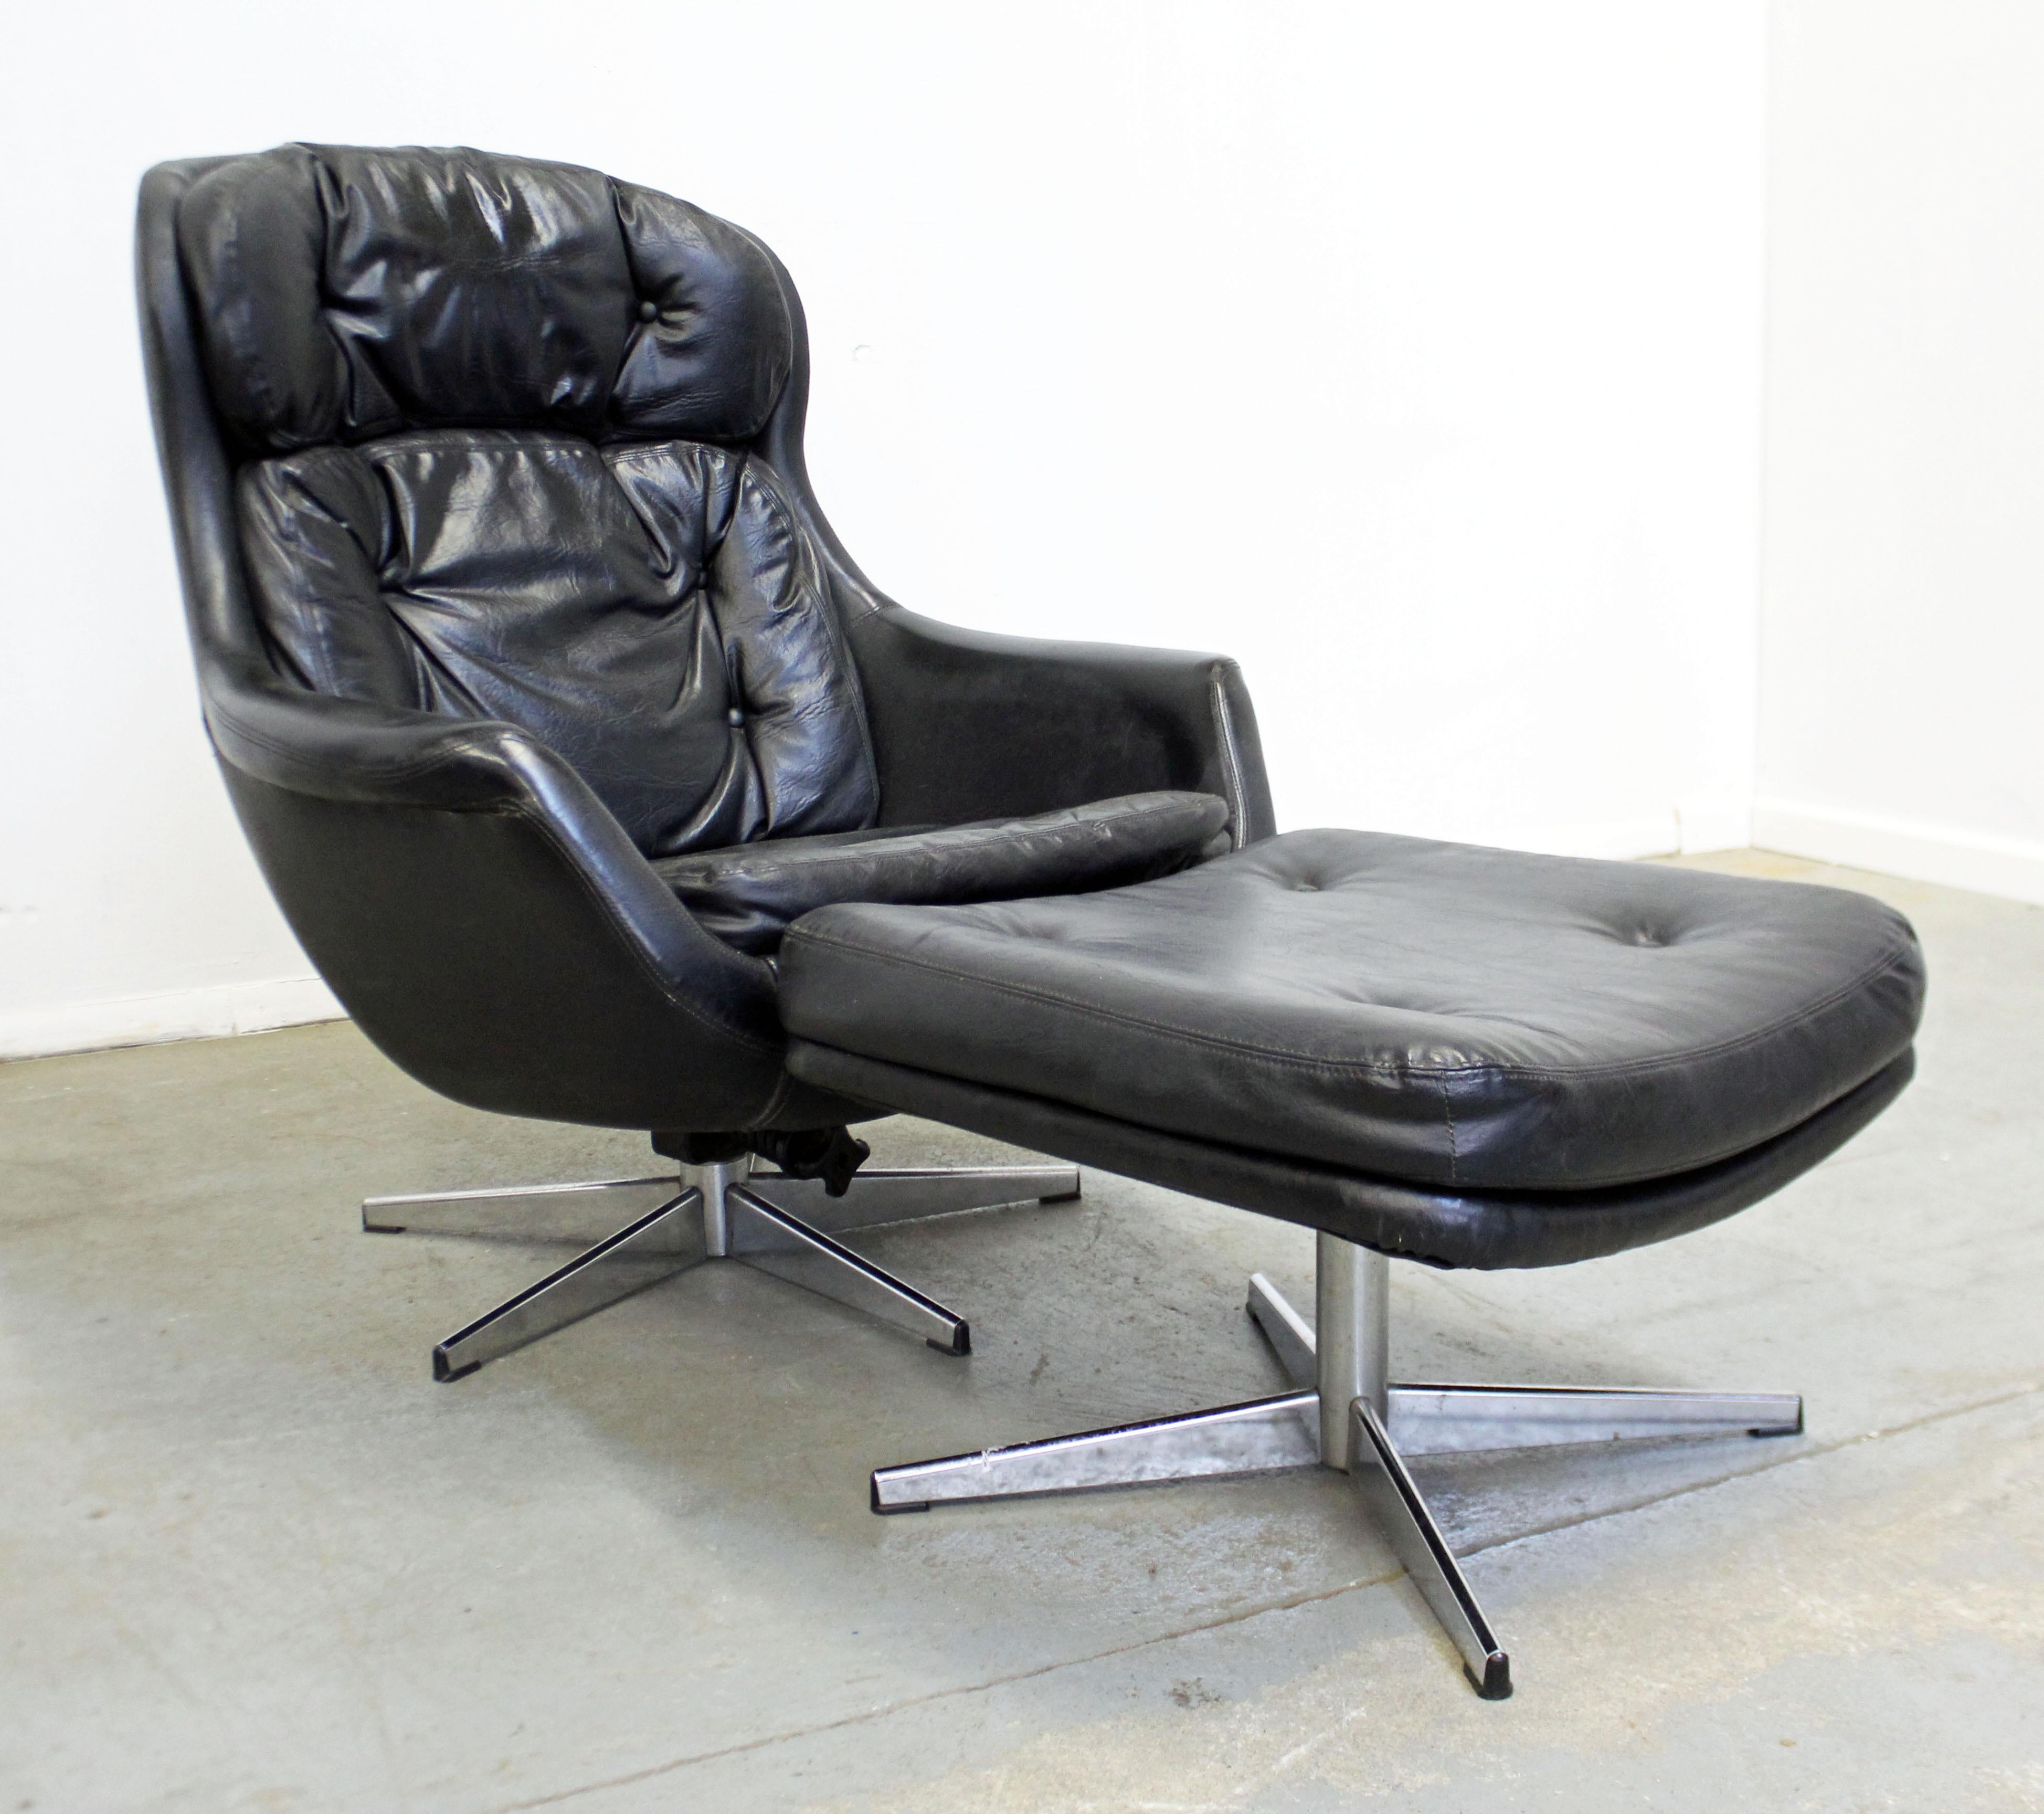 What a find. Offered is an egg style Mid-Century Modern lounge chair and ottoman by Selig Imperial. Features leather upholstery, chrome bases, and the chair rocks. Both the chair and ottoman swivel as well. It is signed by Selig Imperial. 
Approx.